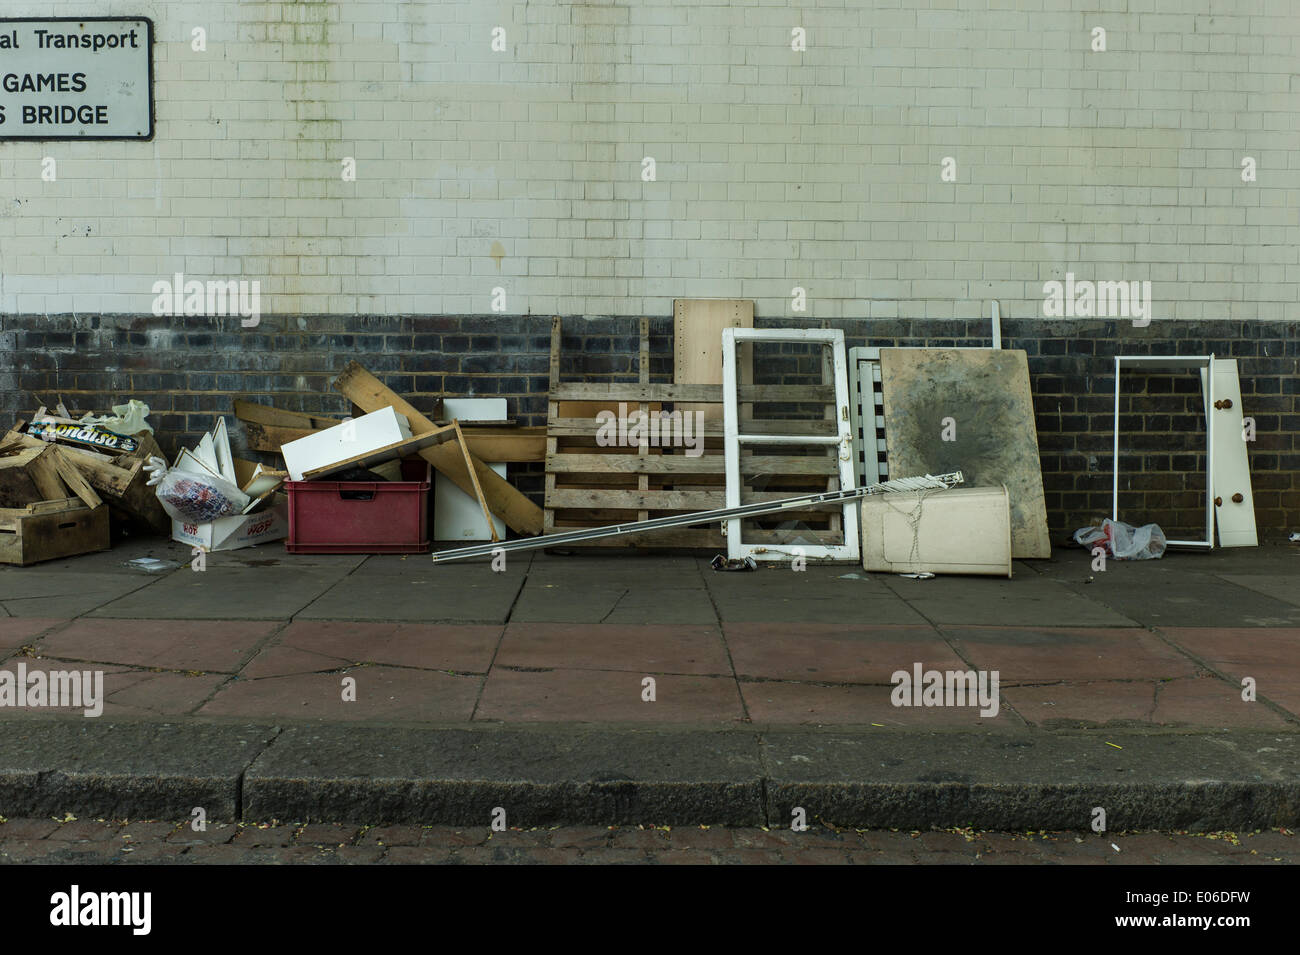 London, UK. 04th May, 2014. London Borough of Barnet, Golders Green NW11 thought of as an affluent area of London has a big problem with fly-tipping. © Rena Pearl/Alamy Live News Stock Photo